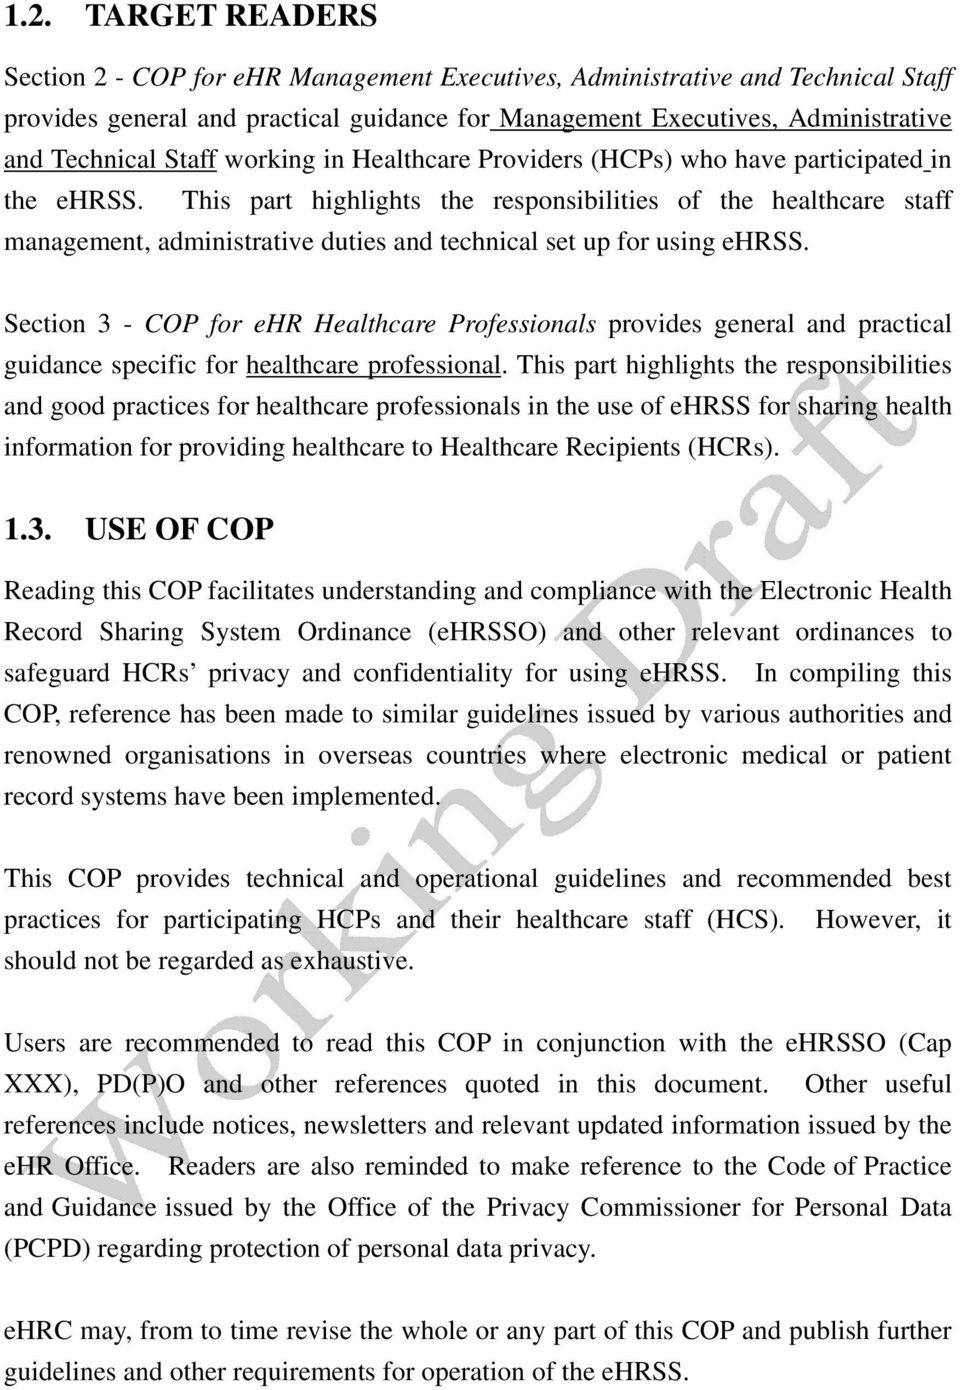 This part highlights the responsibilities of the healthcare staff management, administrative duties and technical set up for using ehrss.